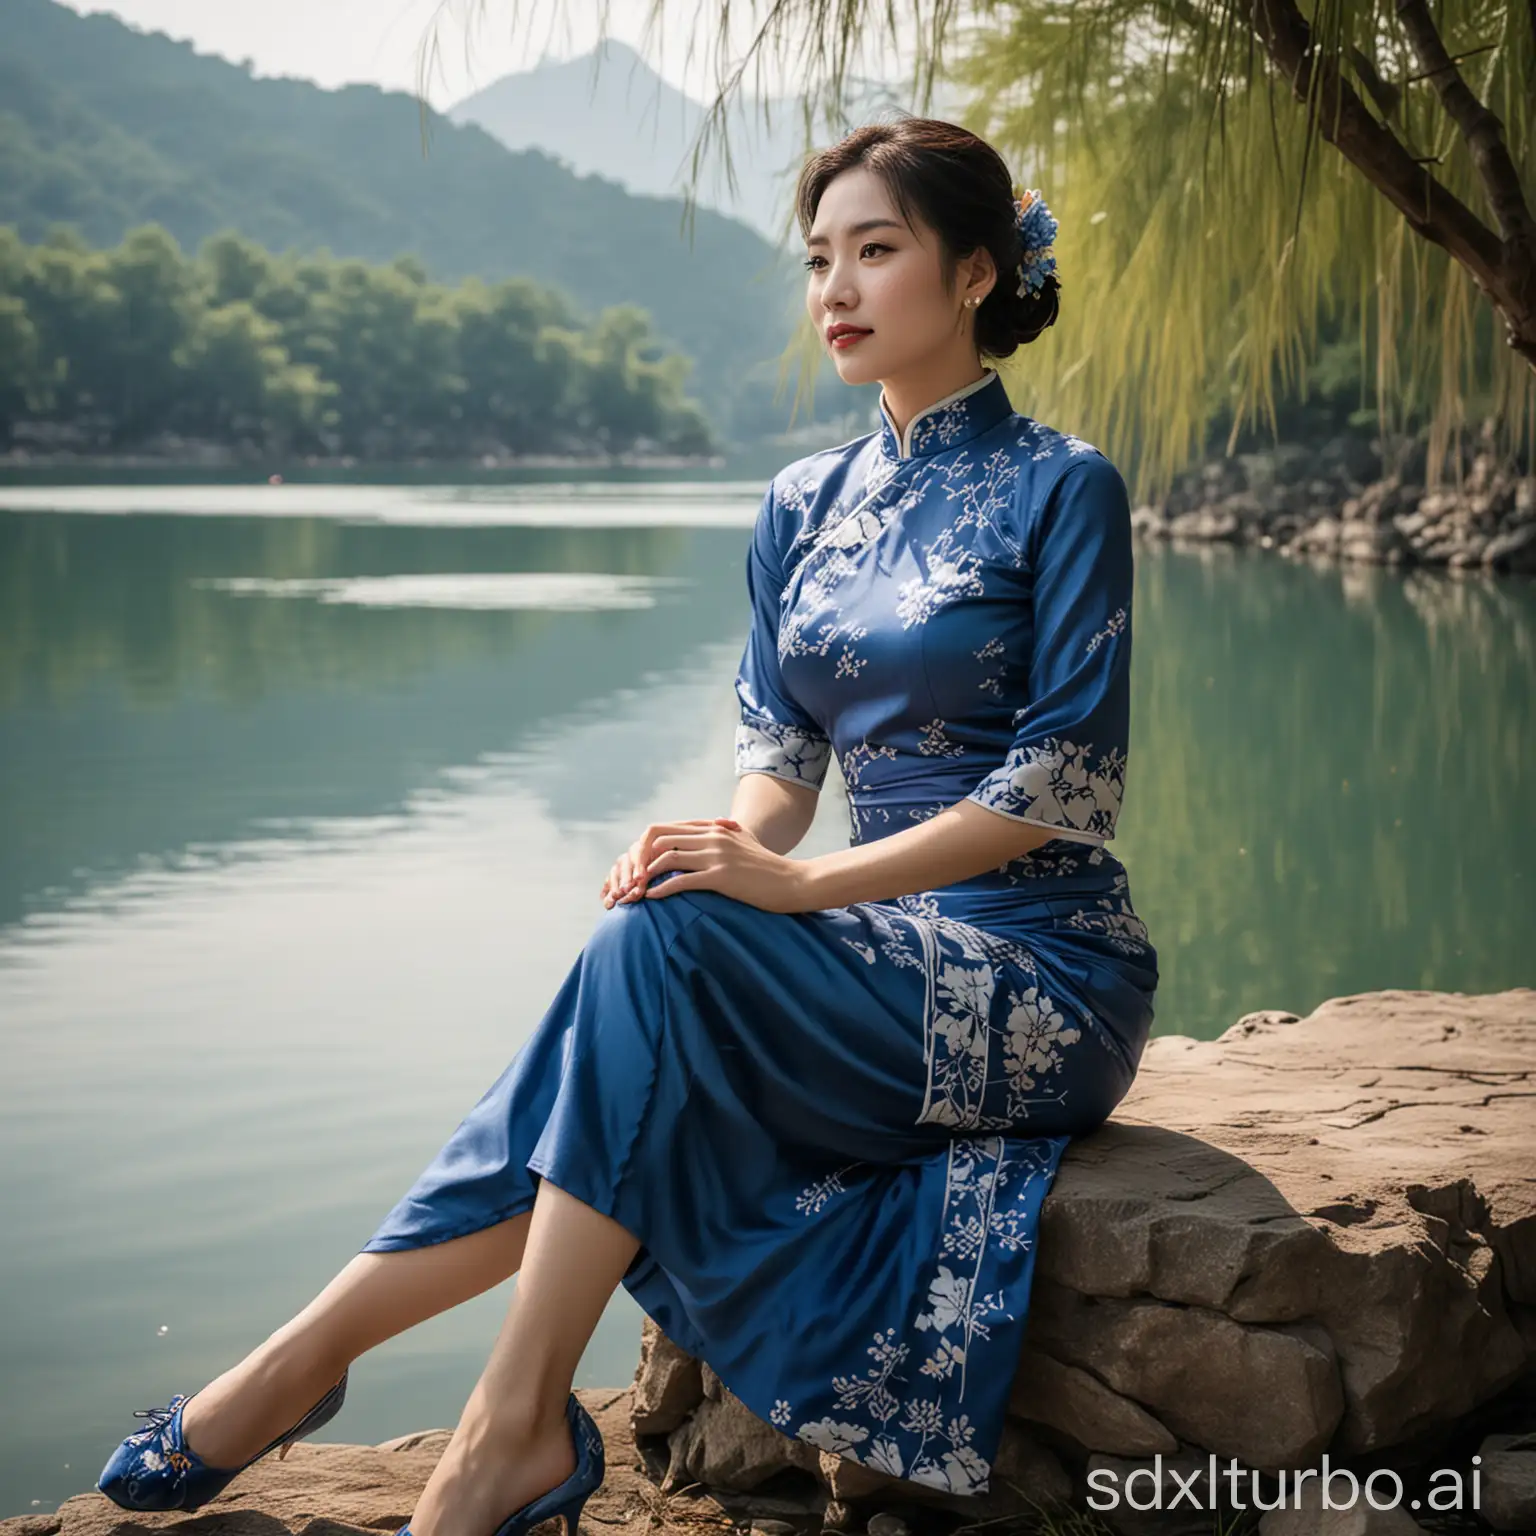 A woman sitting by the lake wearing a qipao in a mid-blue color